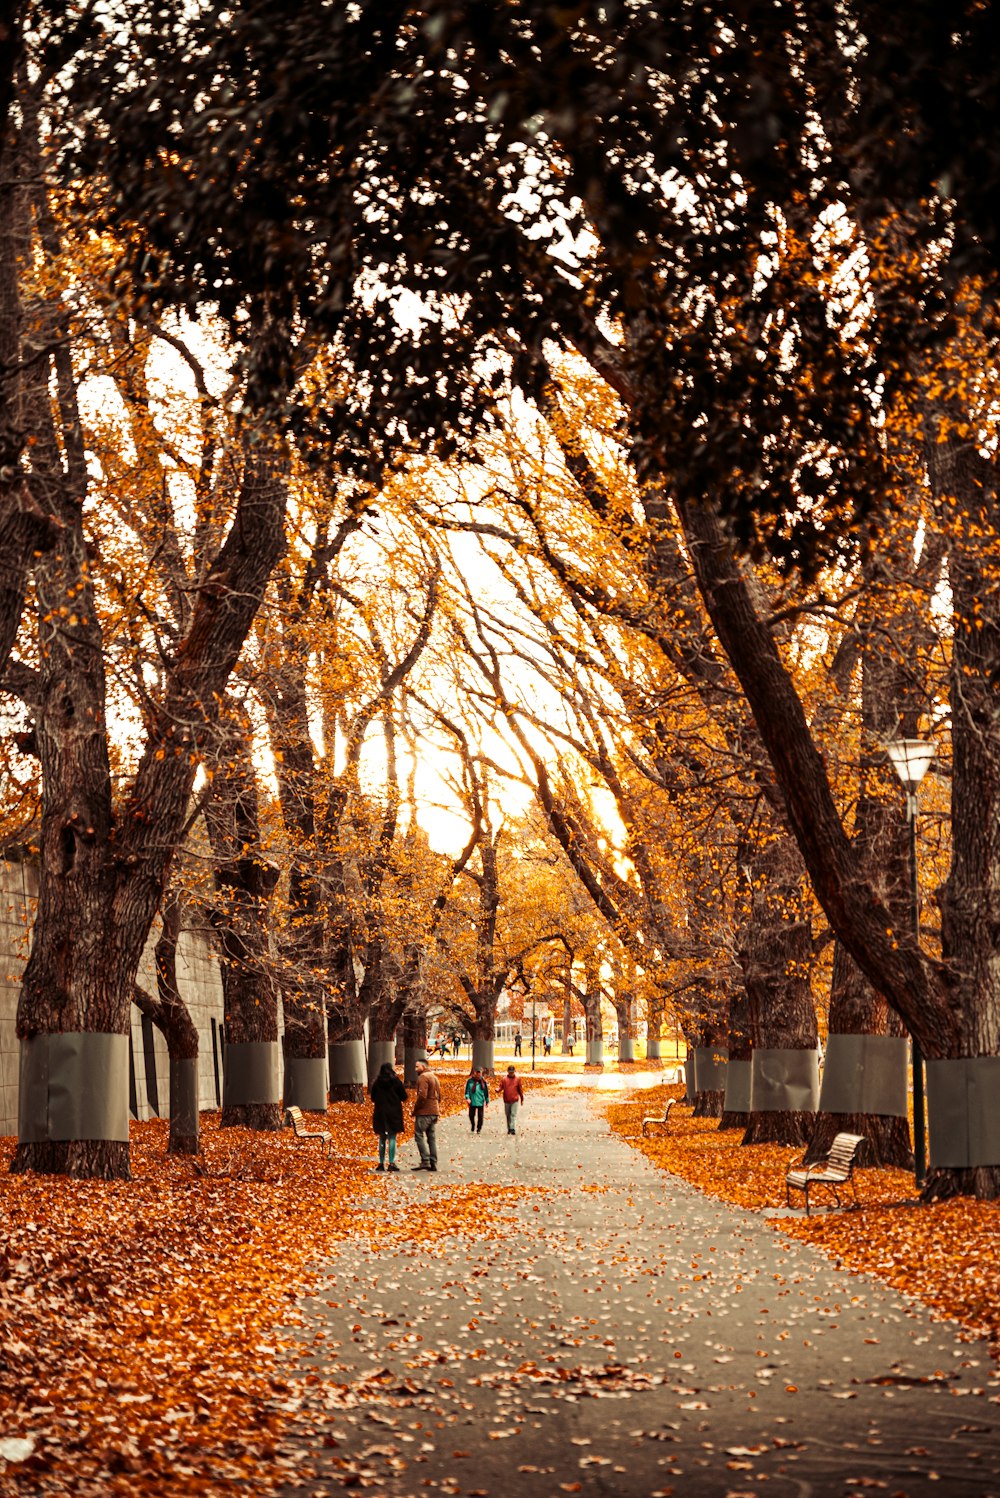 people walking on park with trees during daytime